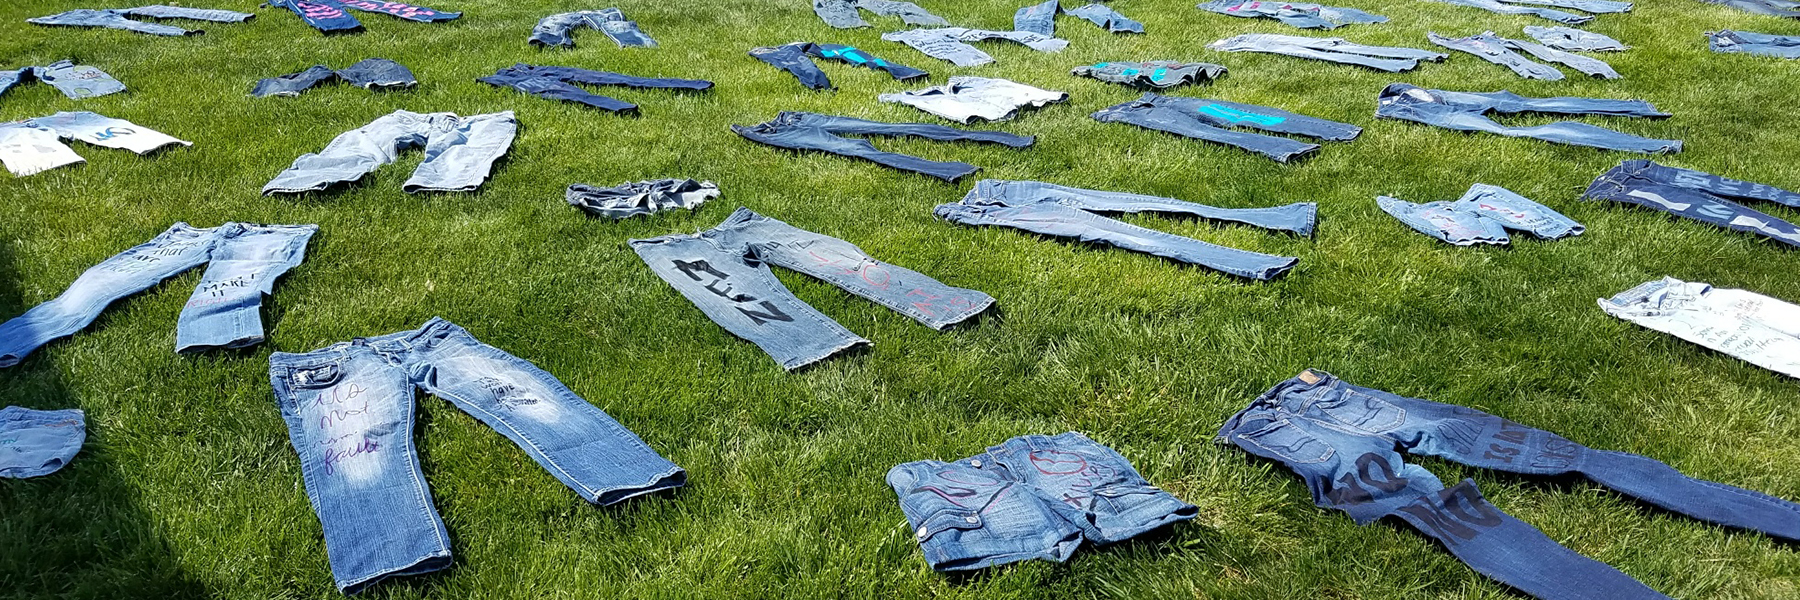 Jeans laid out in the grass.